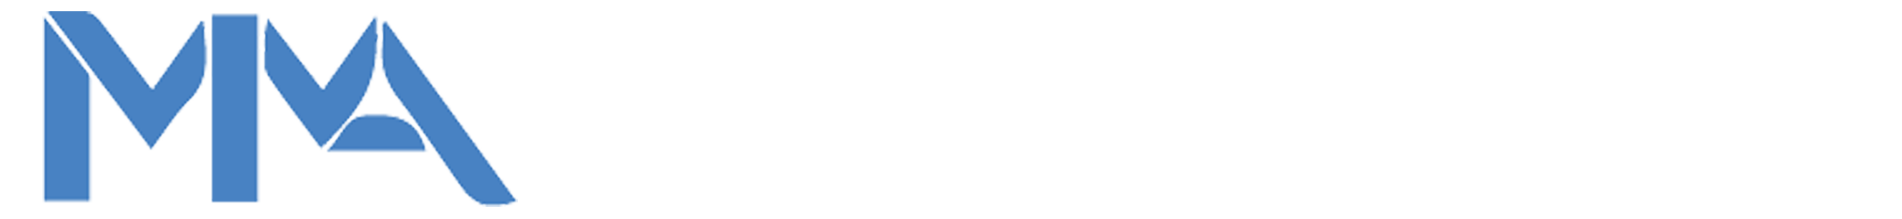 MakeMyAssignments